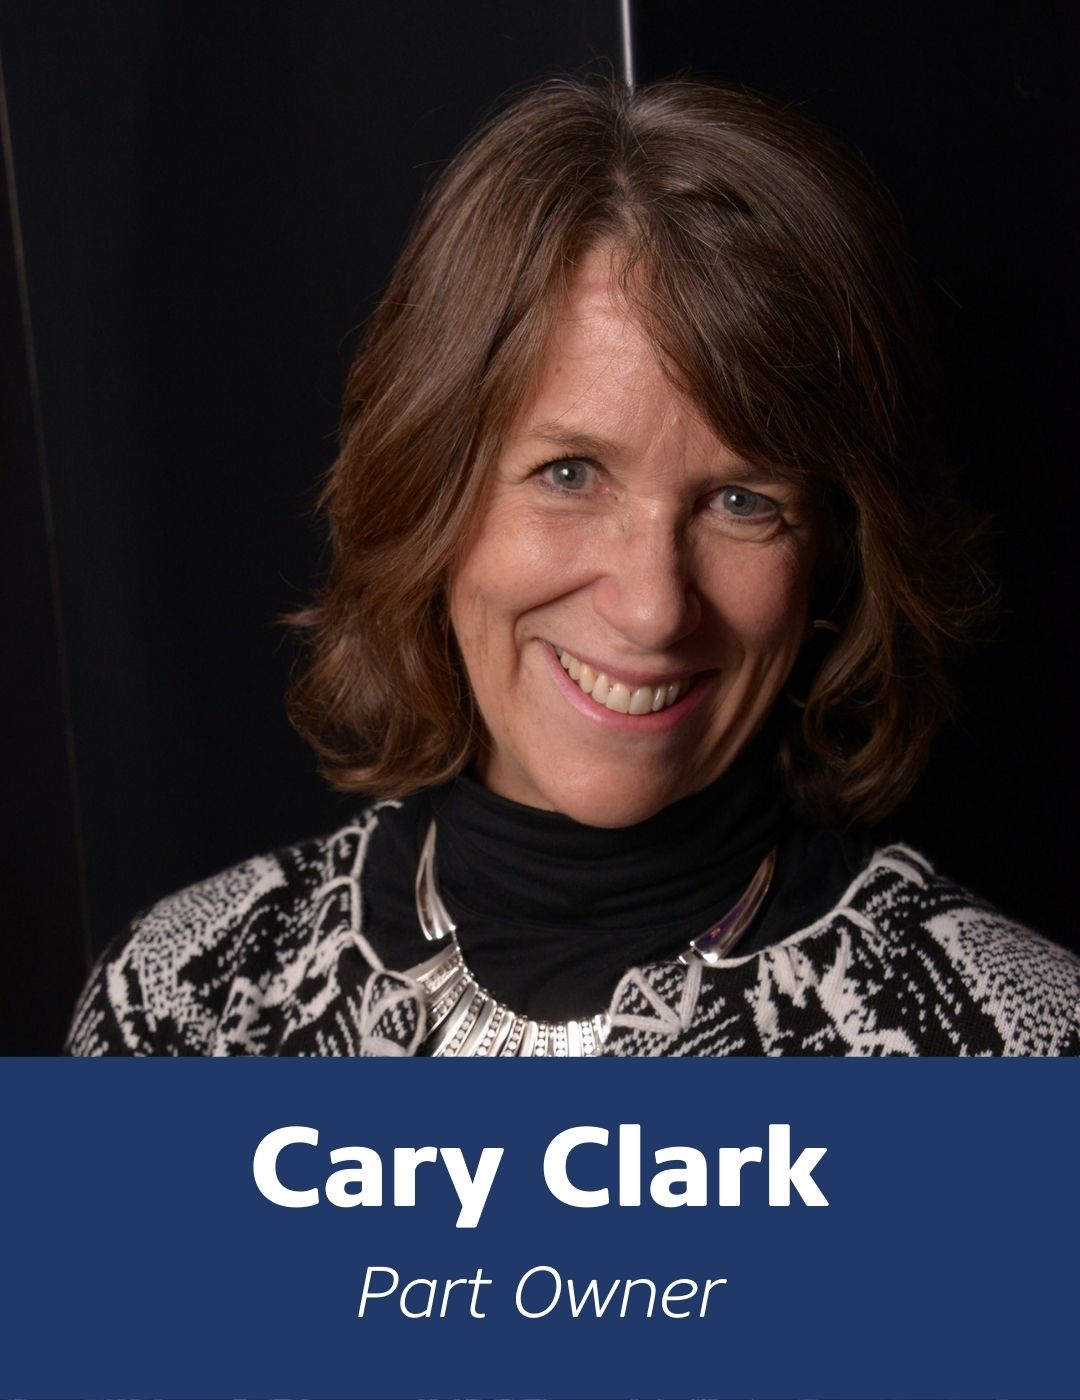 Part Owner, Cary Clark